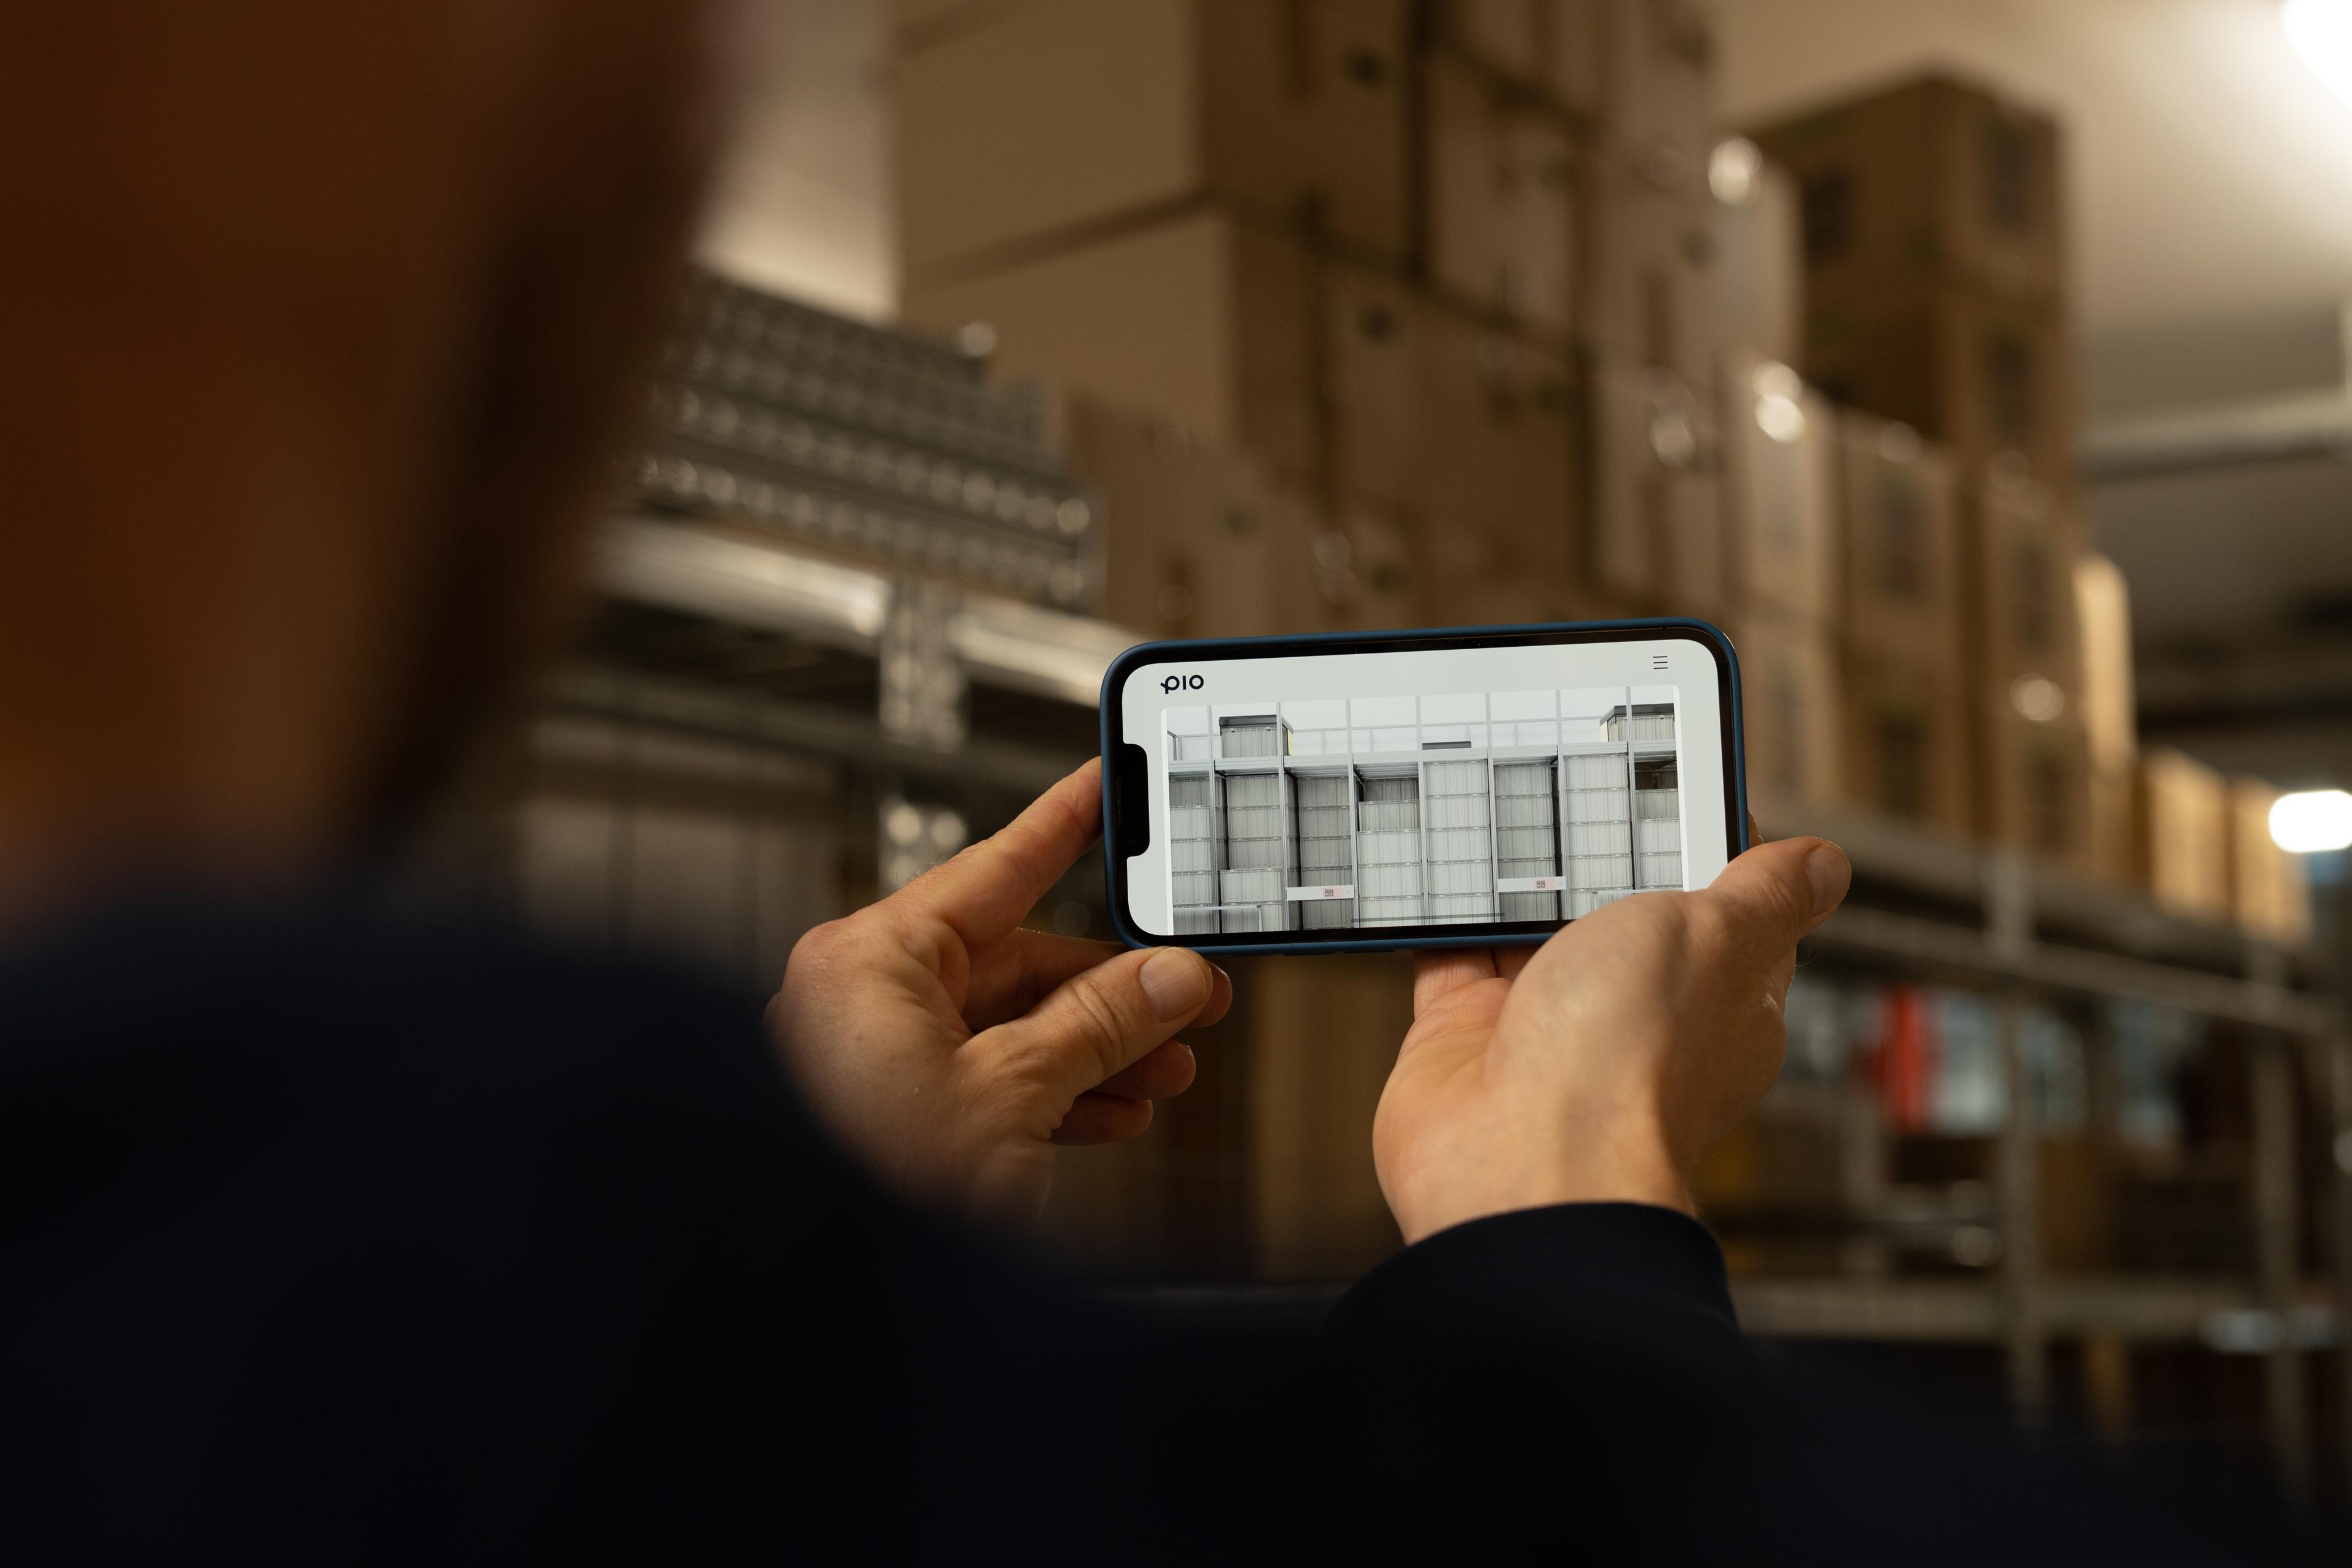 How does planning for a Pio system work? Can I install it in my exsisting warehouse?